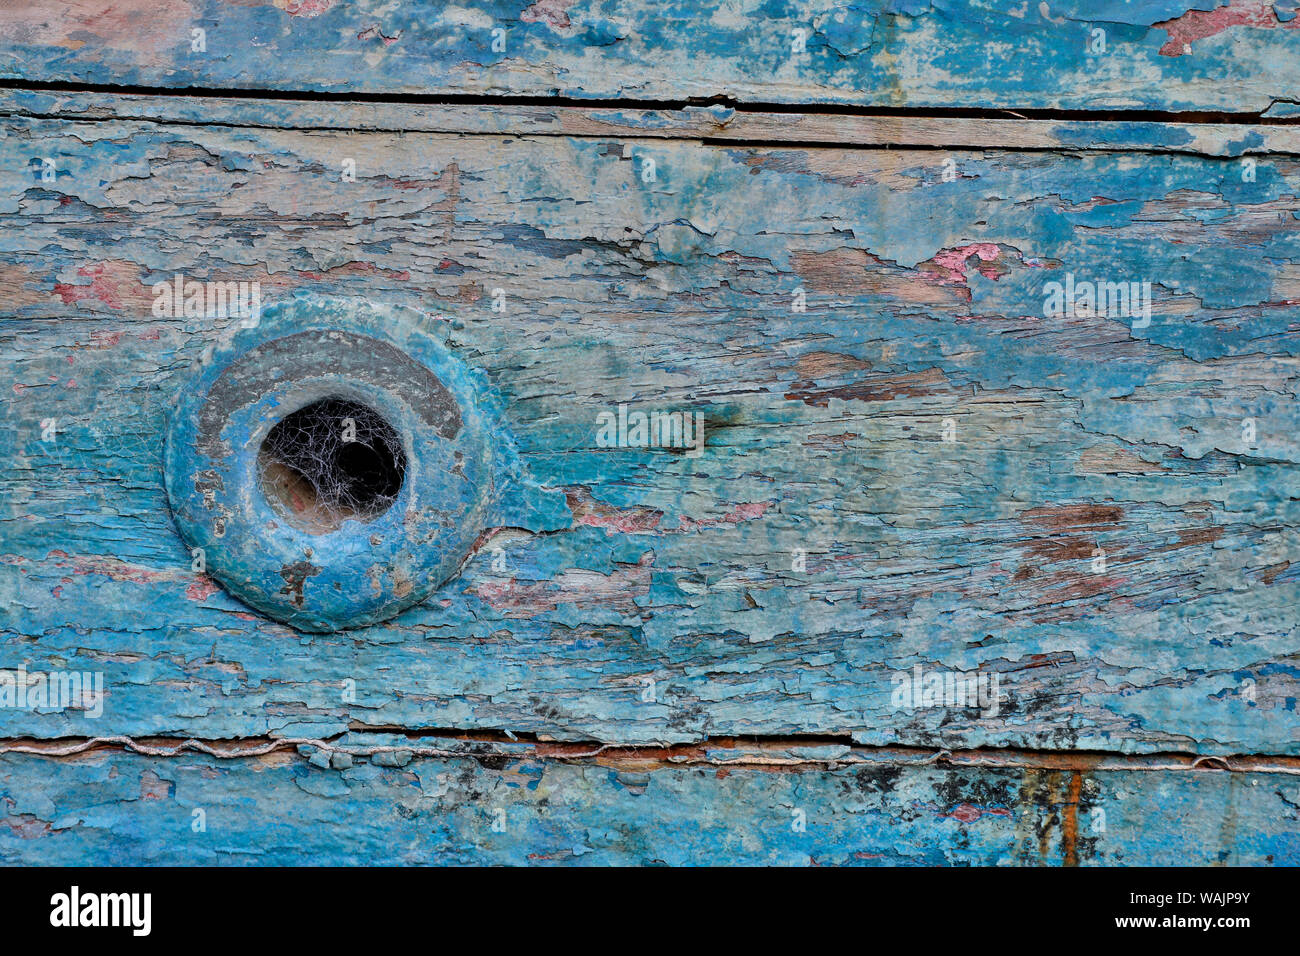 Old wooden fishing boat out of water, detail of paint. Crescent City, California. Stock Photo